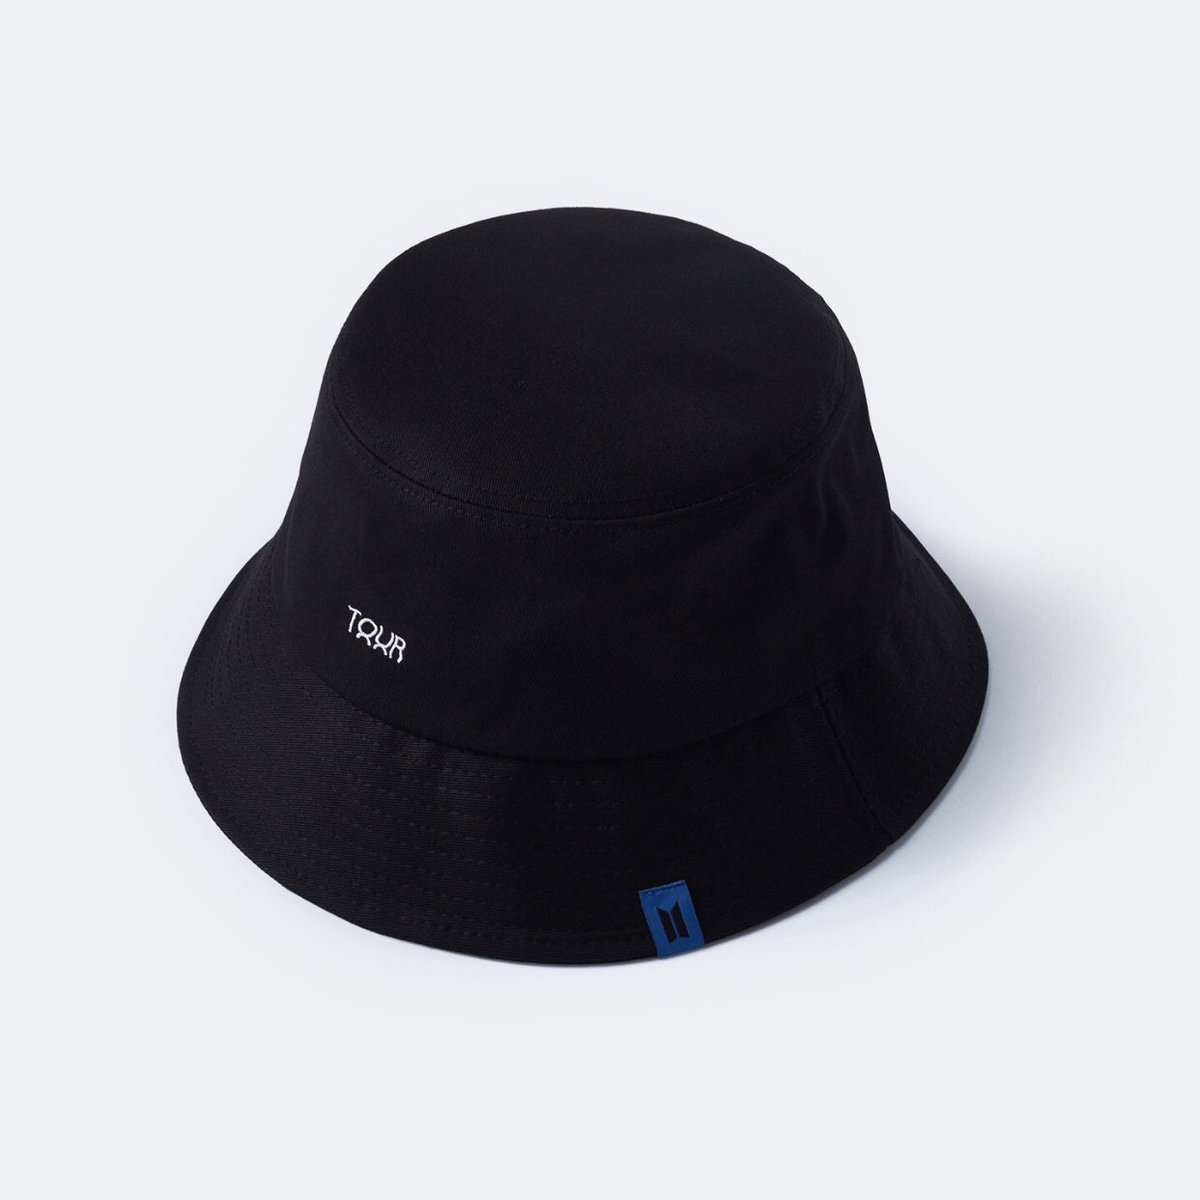 WTS / LFB | PH ONLY FROM: WEVERSE SHOP <GLOBAL>BTS Map of The Soul Tour Bucket HatPHP2,3501 SLOT AVAILABLE